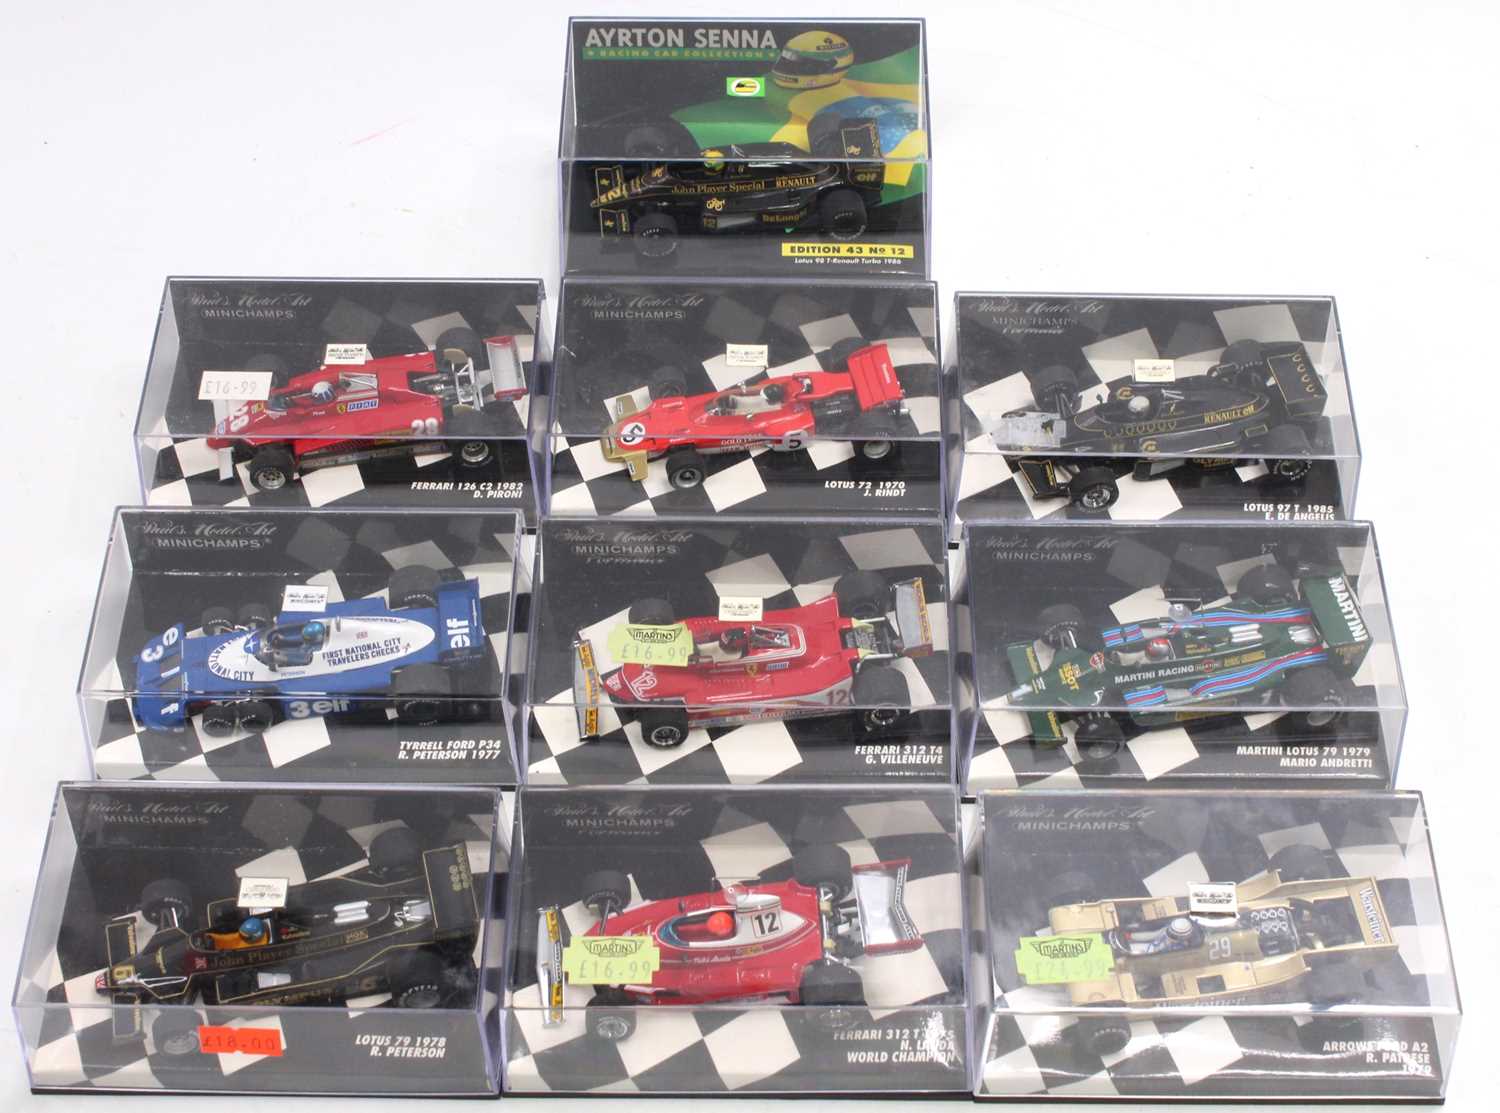 Ten various plastic cased Minichamps 1/43 scale F1 racing diecasts to include an Ayrton Senna racing